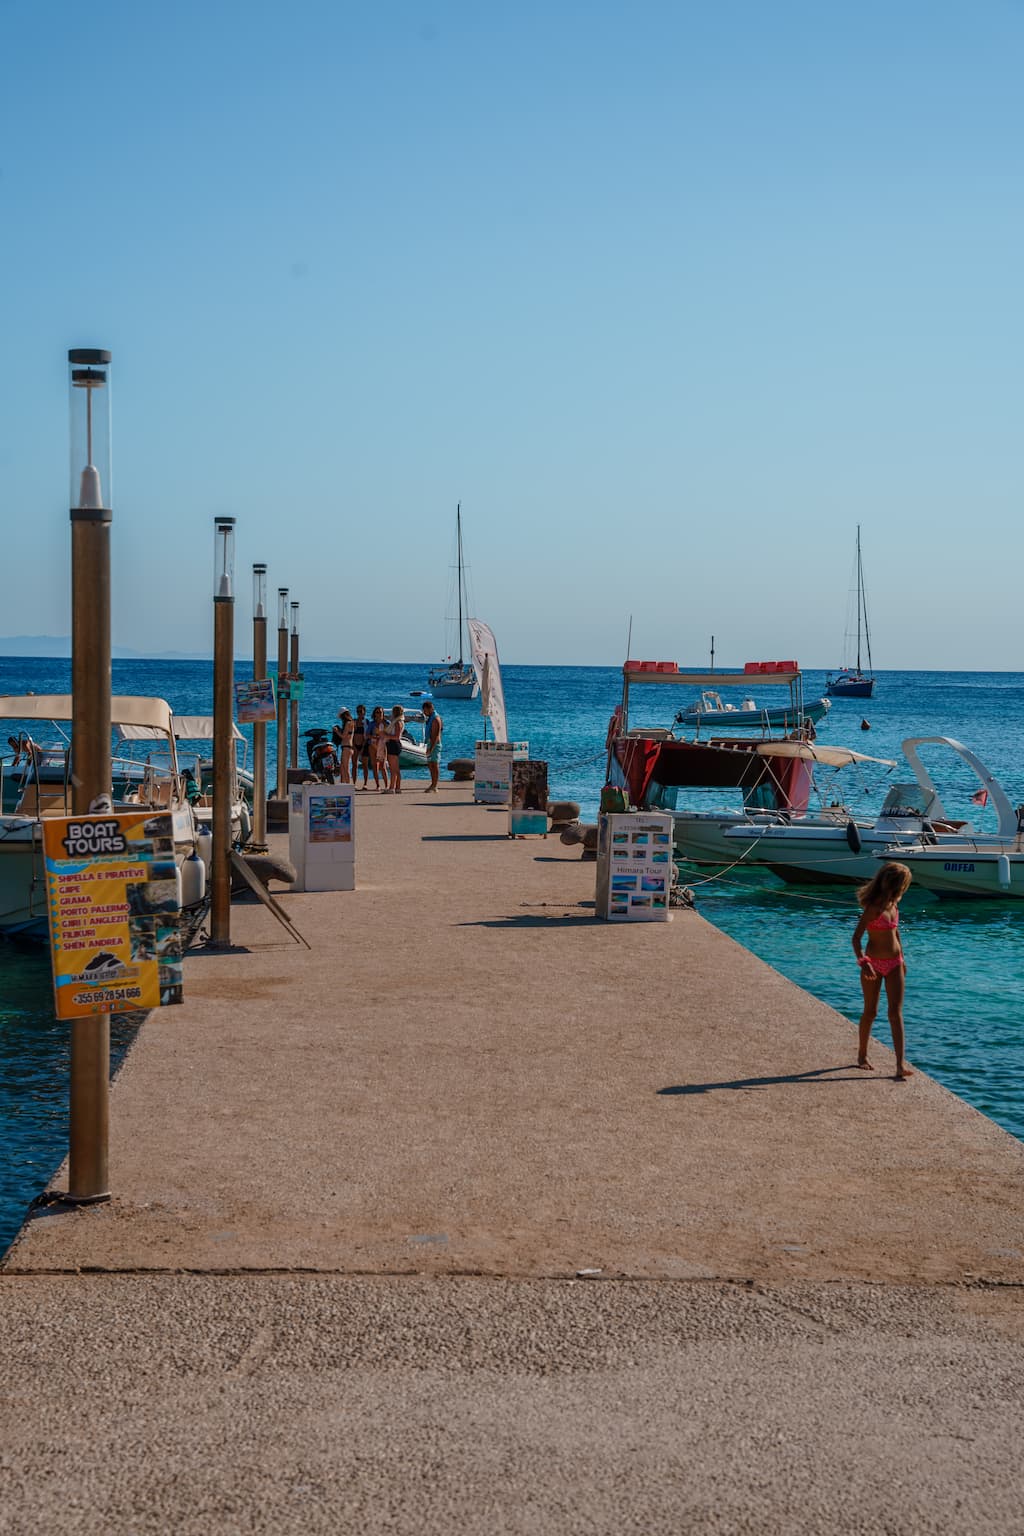 Himare jetty